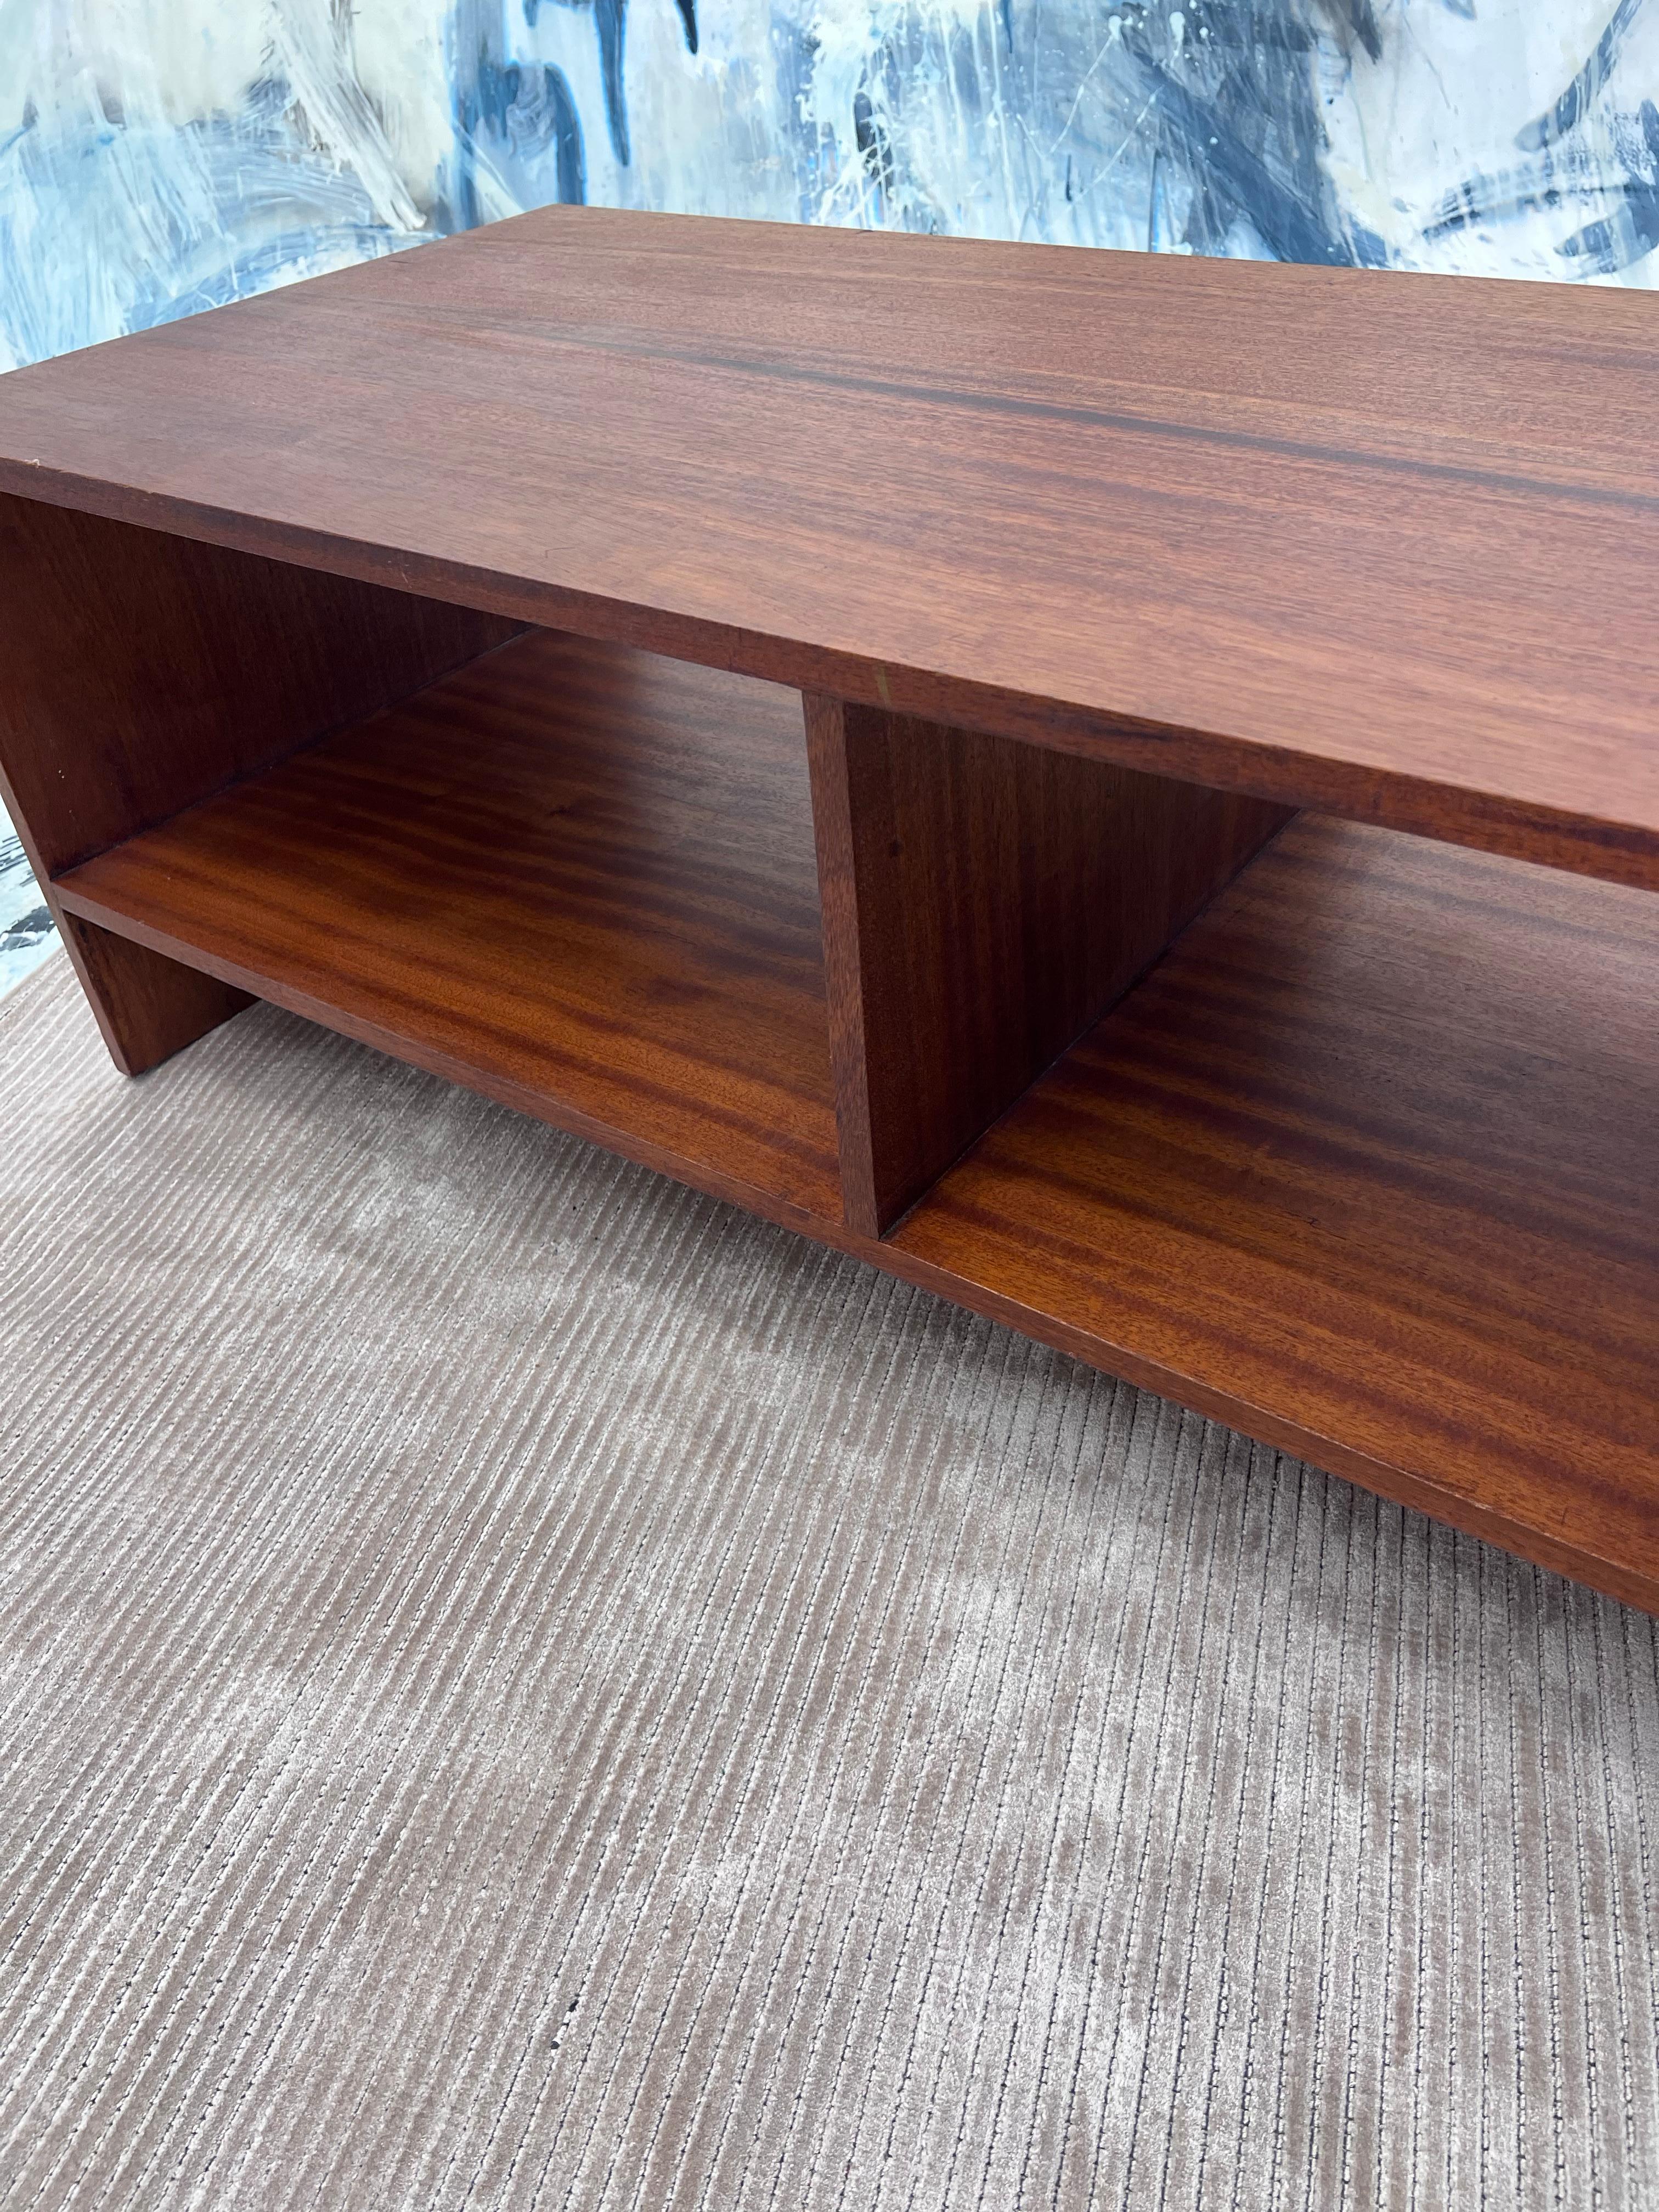 Crafted in solid ribbon mahogany the top and sides are made from the same slabs.
Table features intersecting woodworking joinery and waterfall edges. 

Two lower compartments at 10.5” H x 25”L and 22.5”D 
